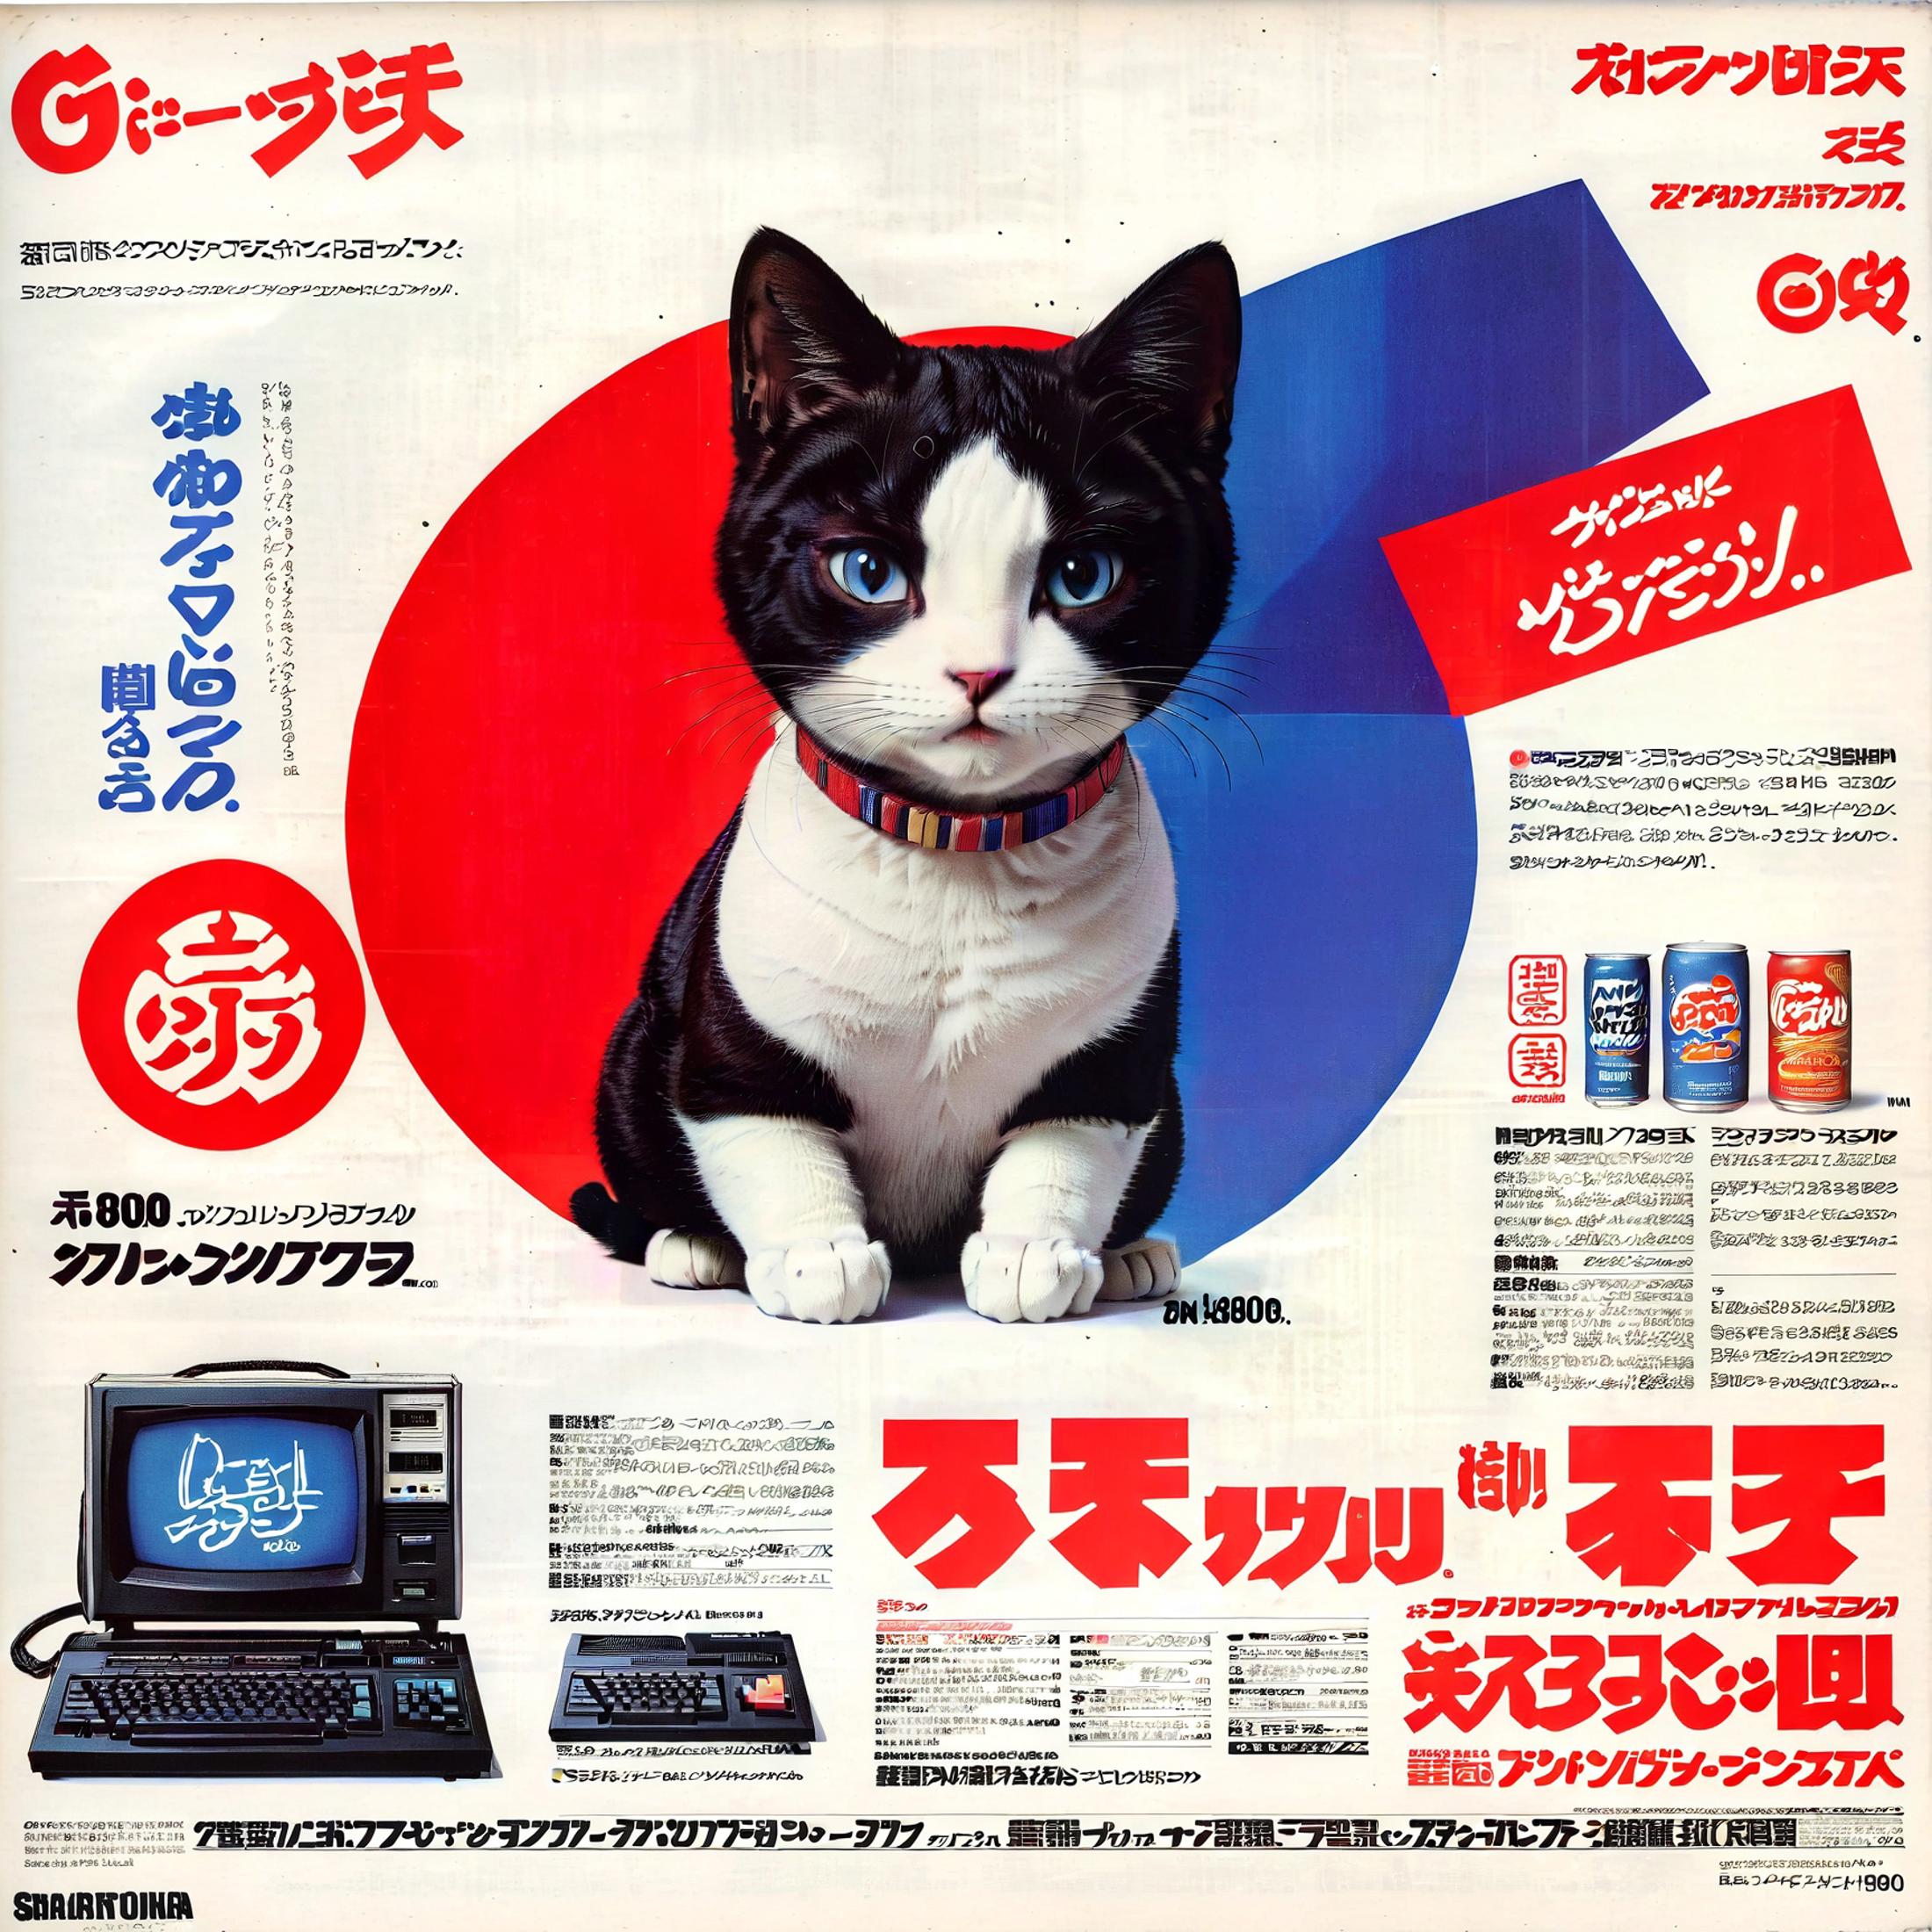 Capture the 1980s Japanese Advertising Style image by PotatCat